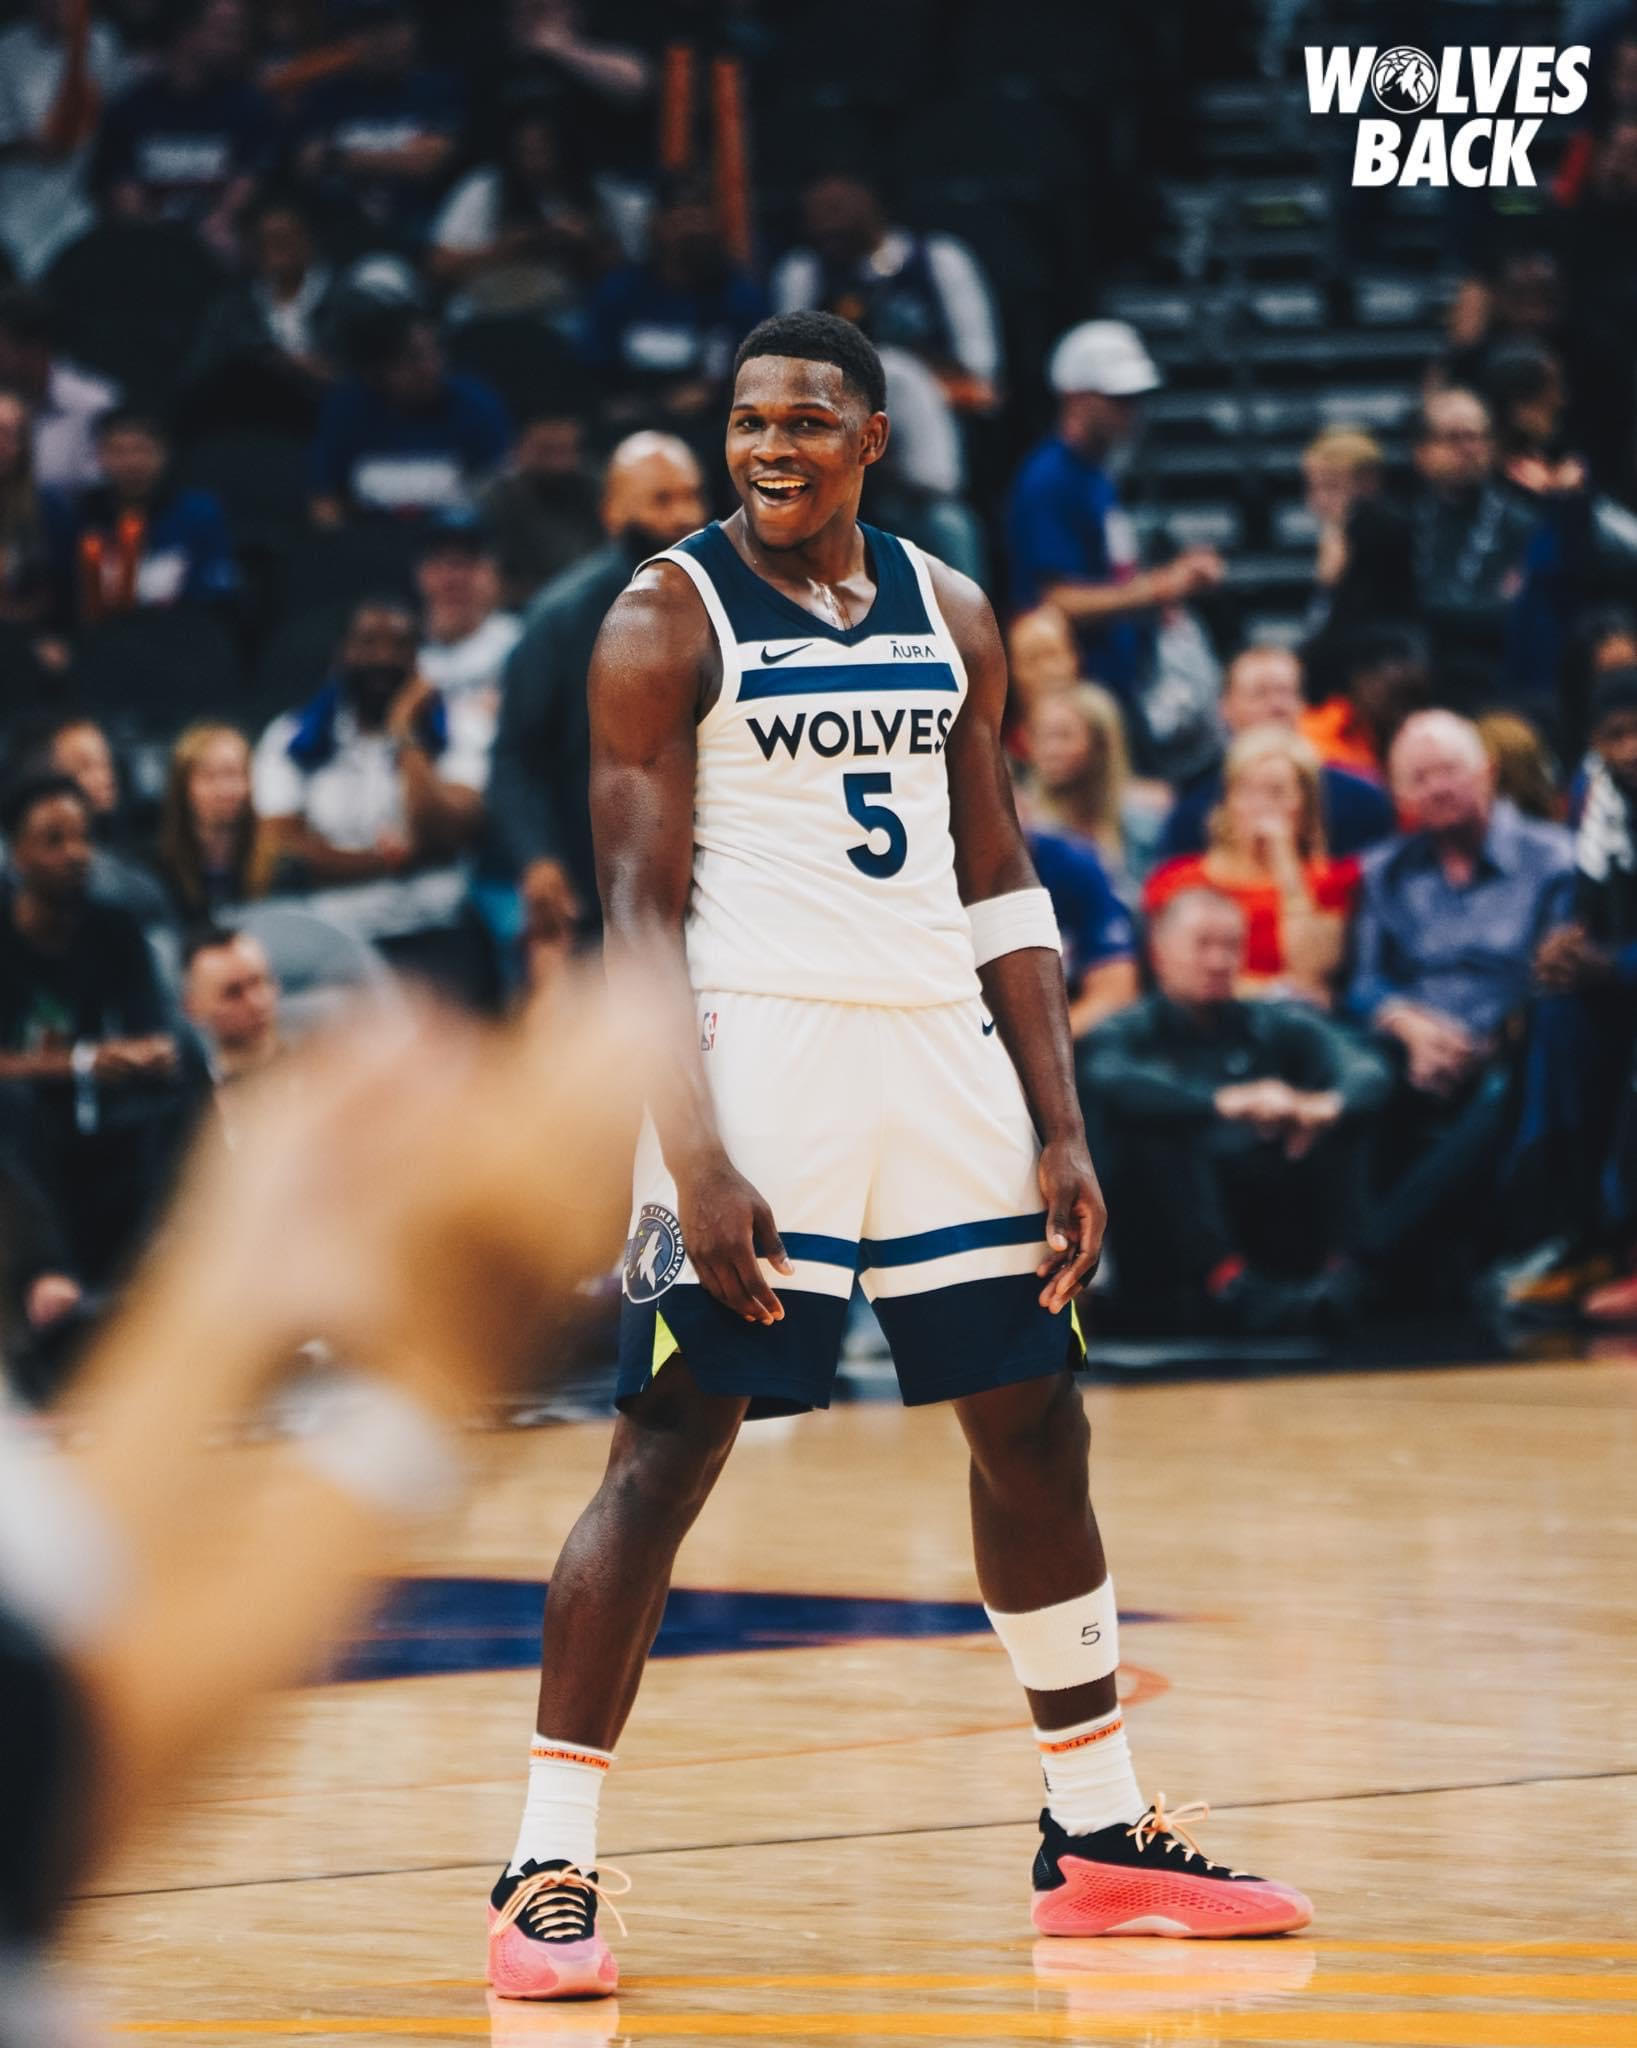 Timberwolves Take A Commanding 3-0 Series Lead with Win over Suns Image credits, Minnesota Timberwolves.